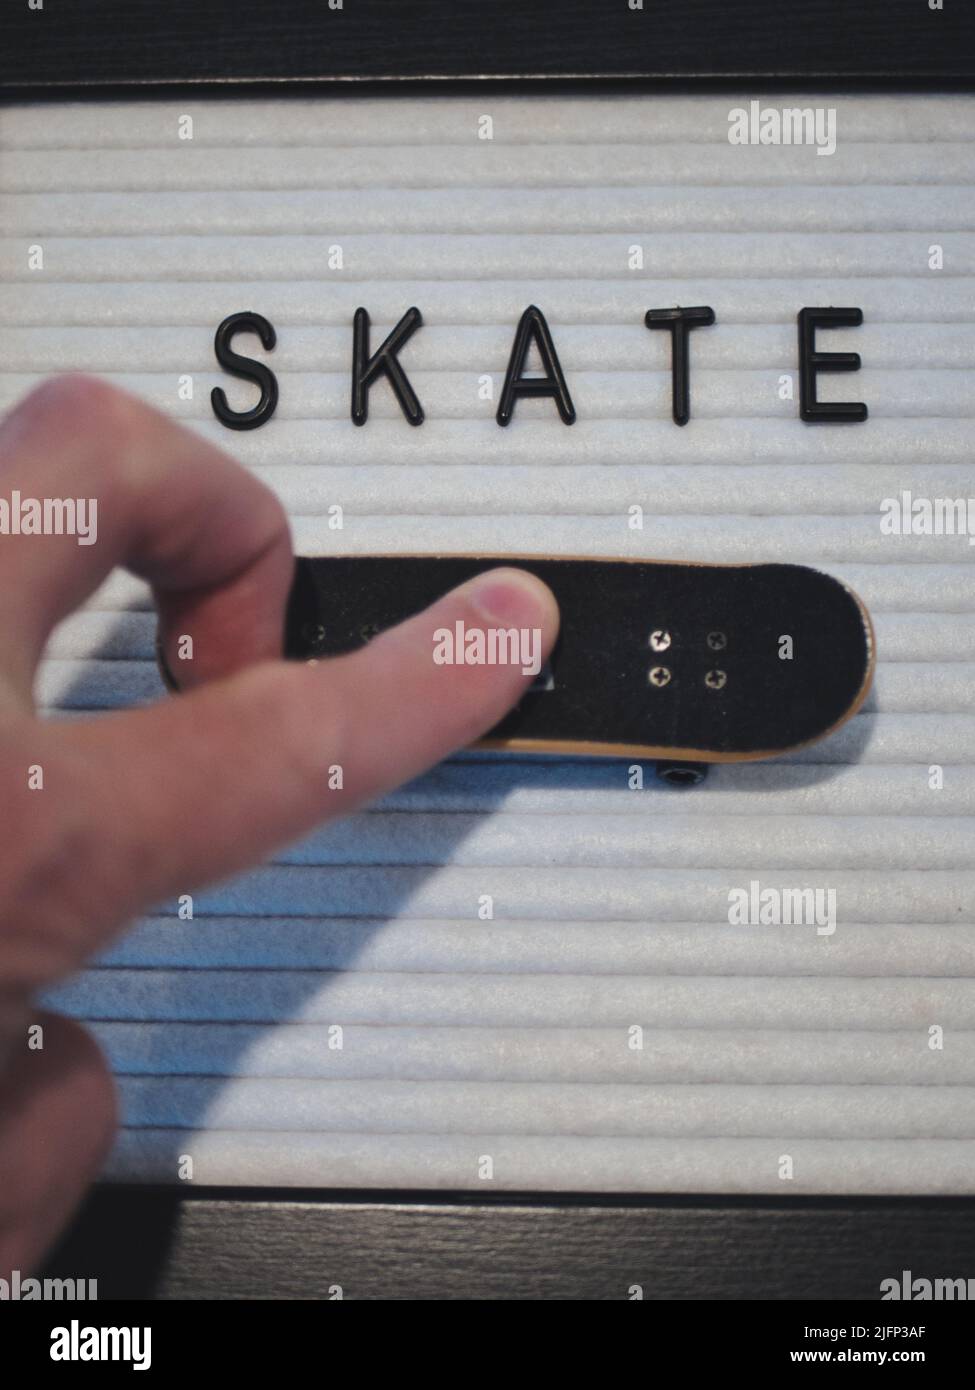 Skate in black text. Professional fingerboard expert about to do a 360 kickflip (tre flip). Fun graphic to illustrate skateboarding in a royalty free Stock Photo